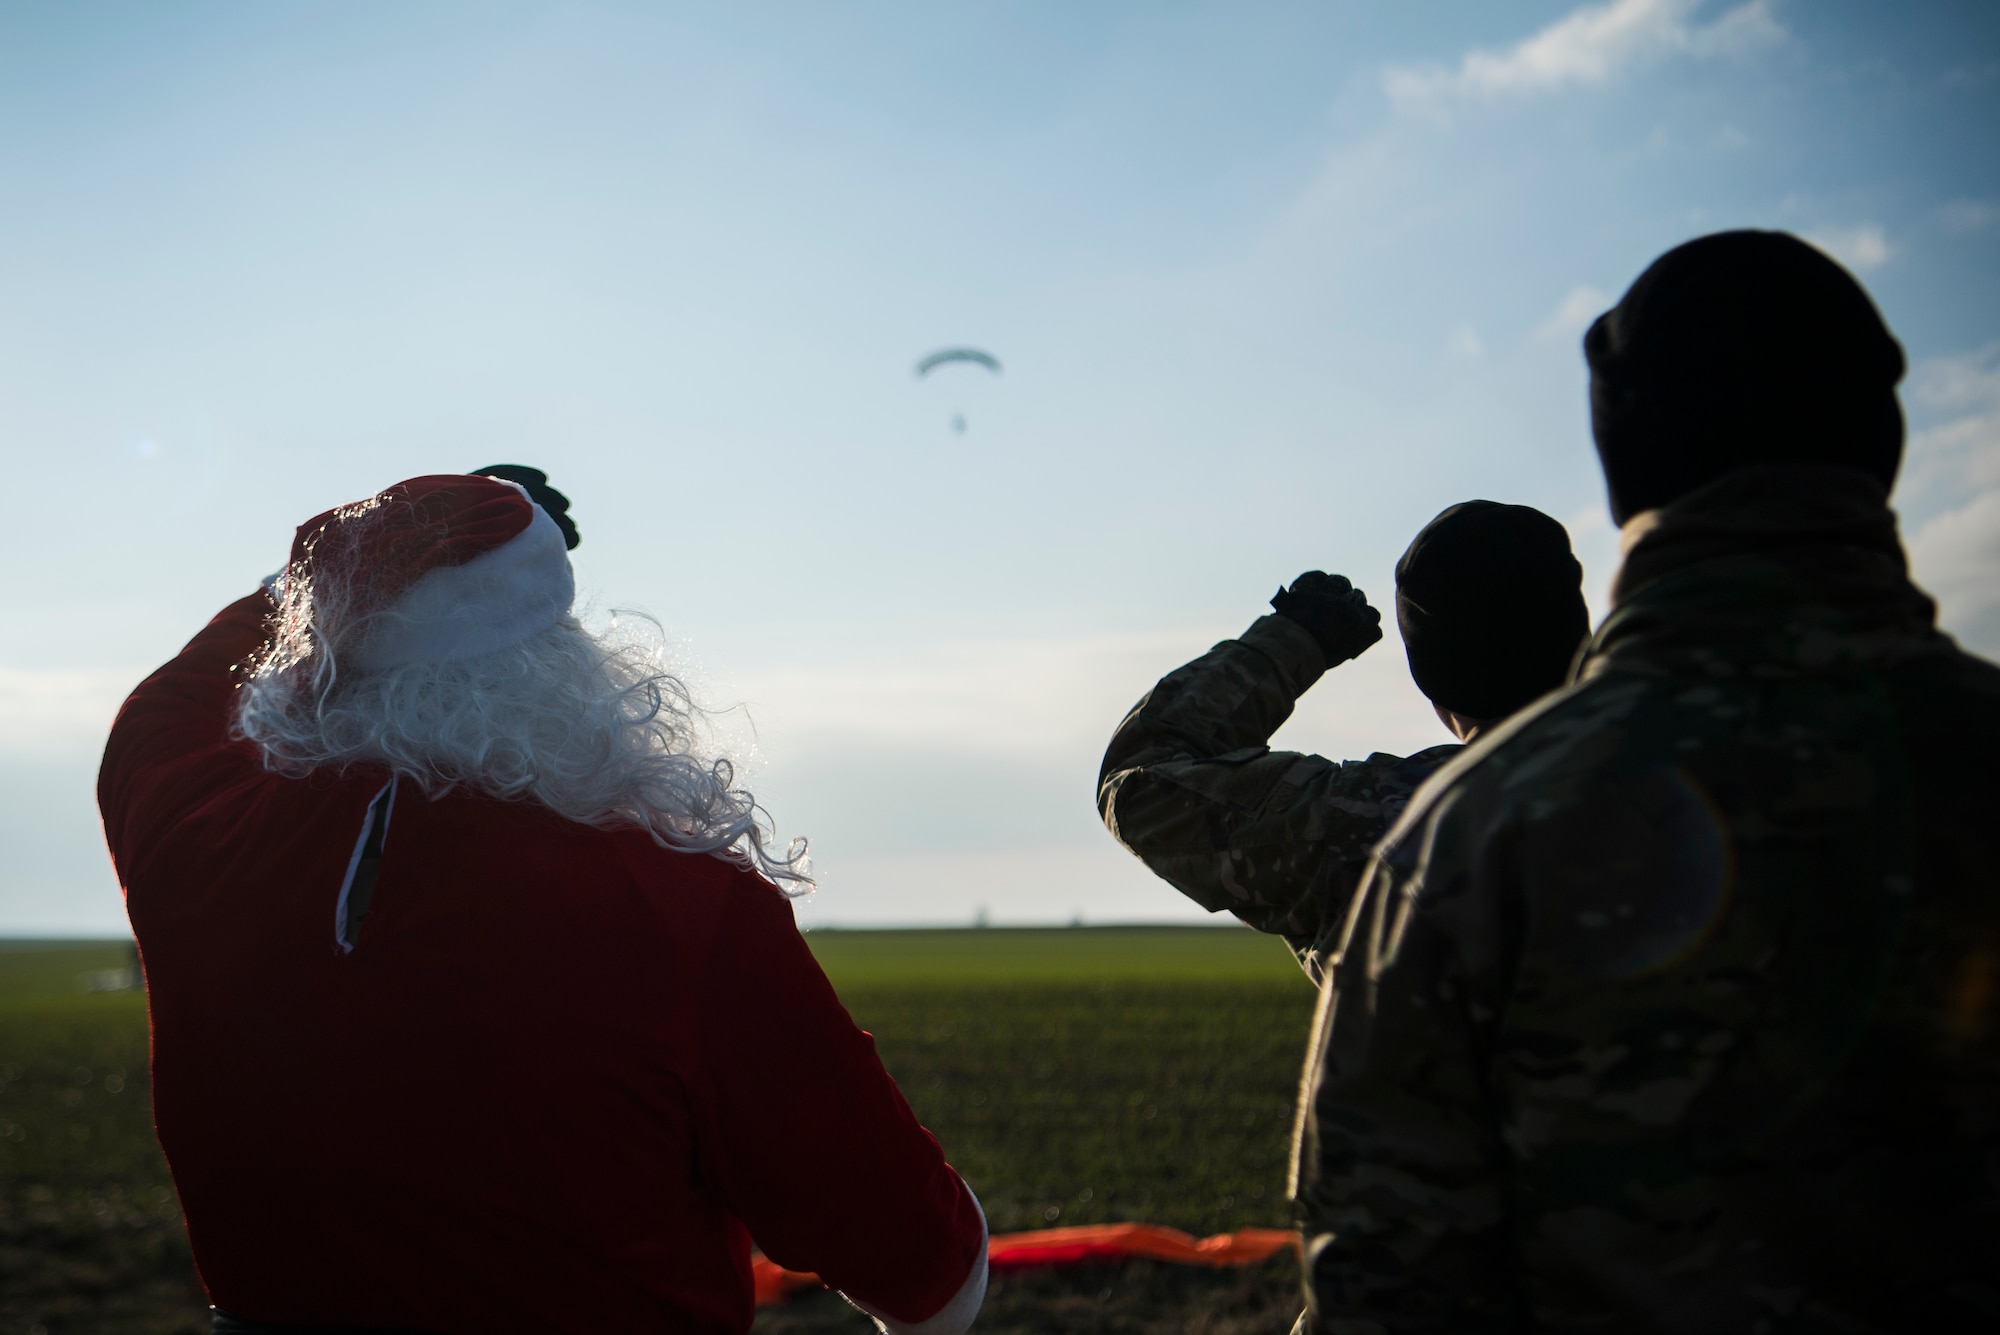 Santa and his helpers, along with members of the U.S. Air Force, U.S. Army, and seven partner nations conducted static-line and military freefall jumps for Operation Toy Drop 2018, over Alzey Drop Zone, Germany Dec. 11-13, 2018.